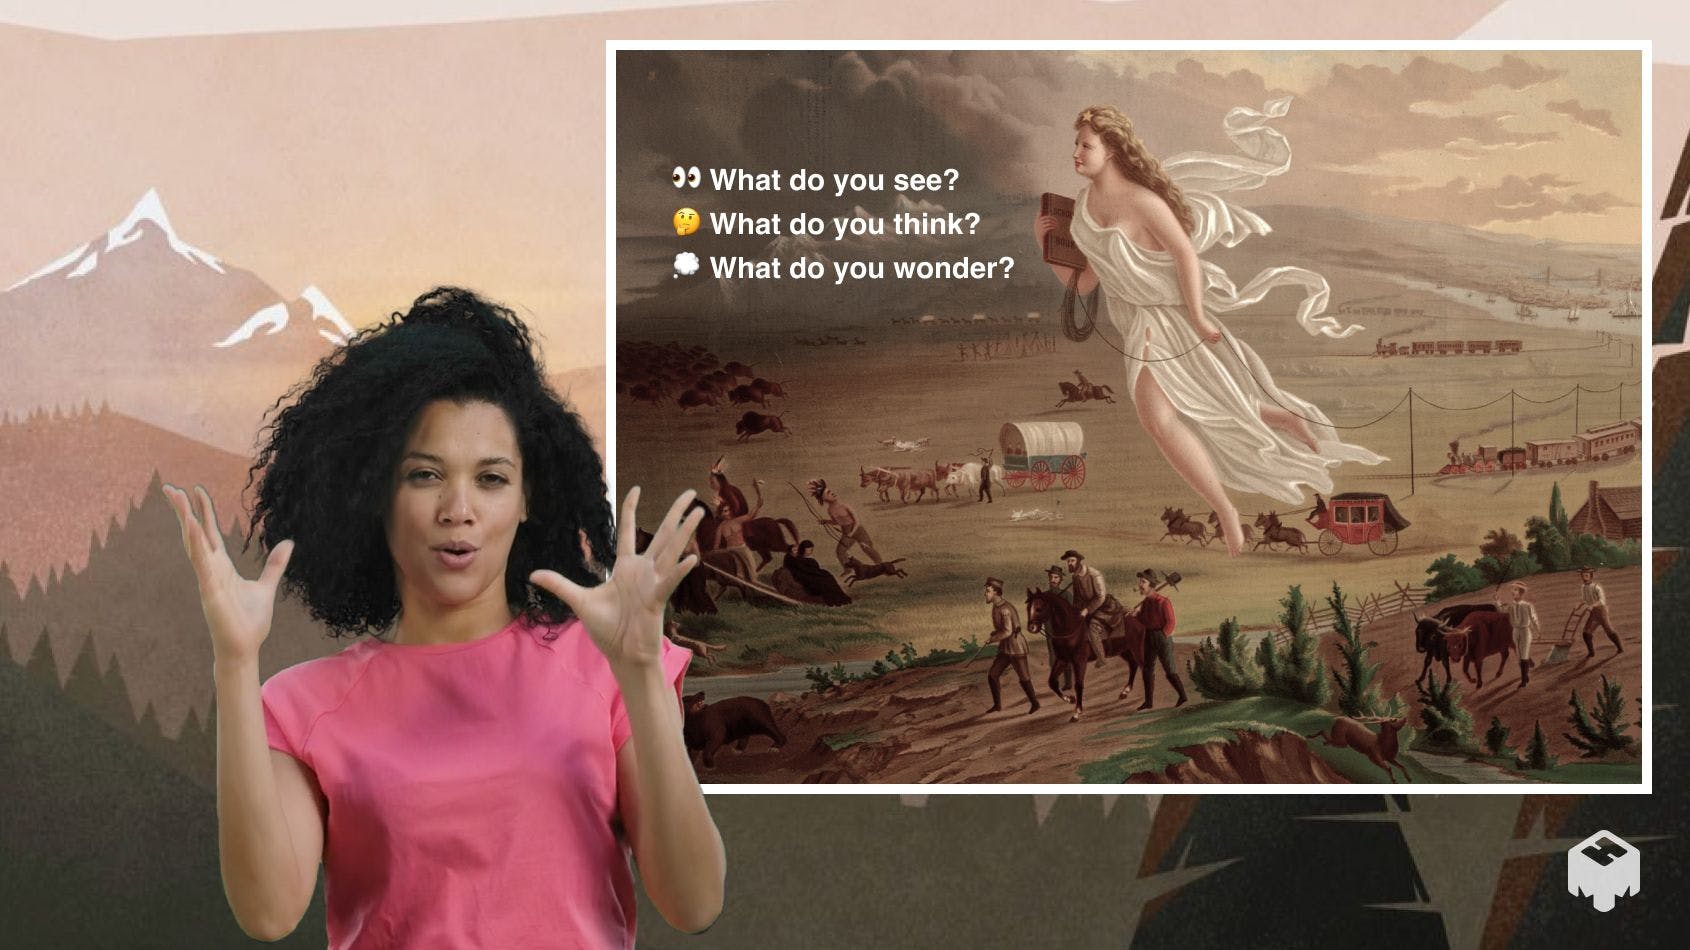 Person with pink shirt showing a slide of a painting of an angel that says "What do you see? What do you think? What do you wonder?"